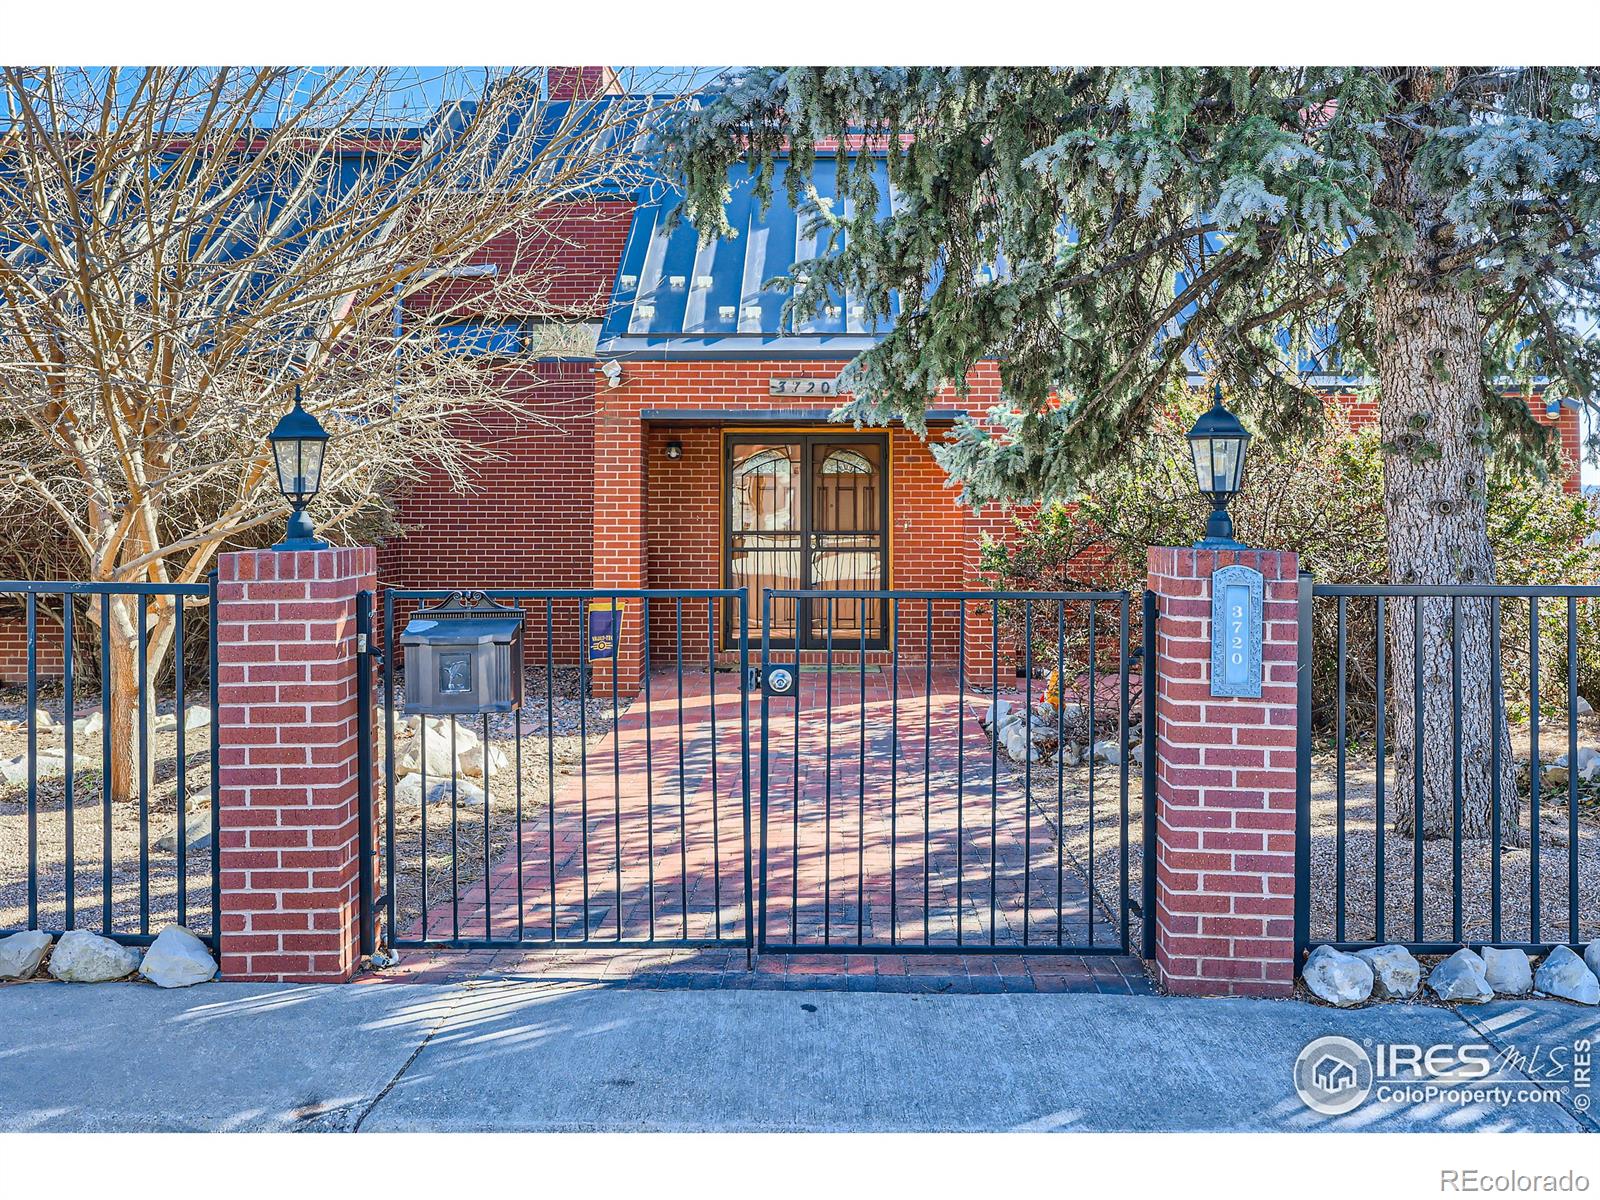 Report Image for 3720 W 81st Place,Westminster, Colorado